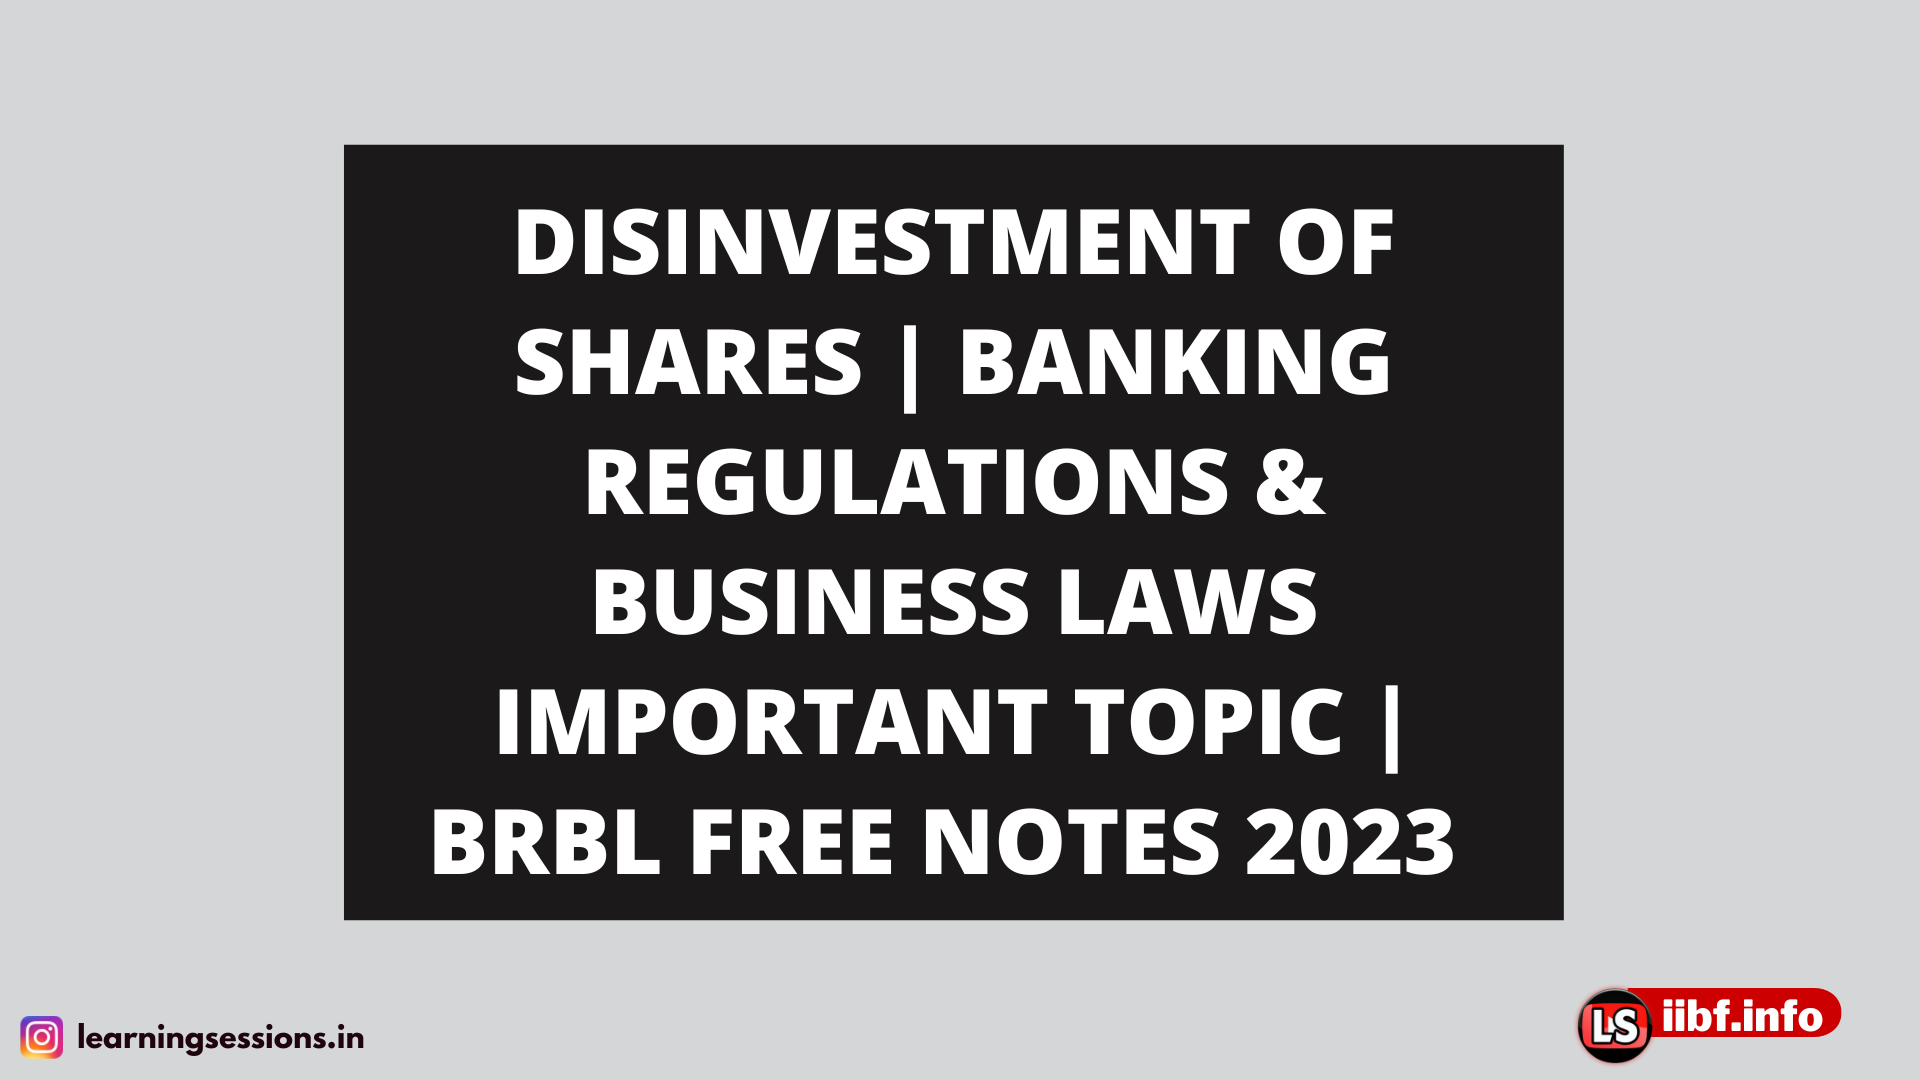 DISINVESTMENT OF SHARES | BANKING REGULATIONS & BUSINESS LAWS IMPORTANT TOPIC | BRBL FREE NOTES 2023